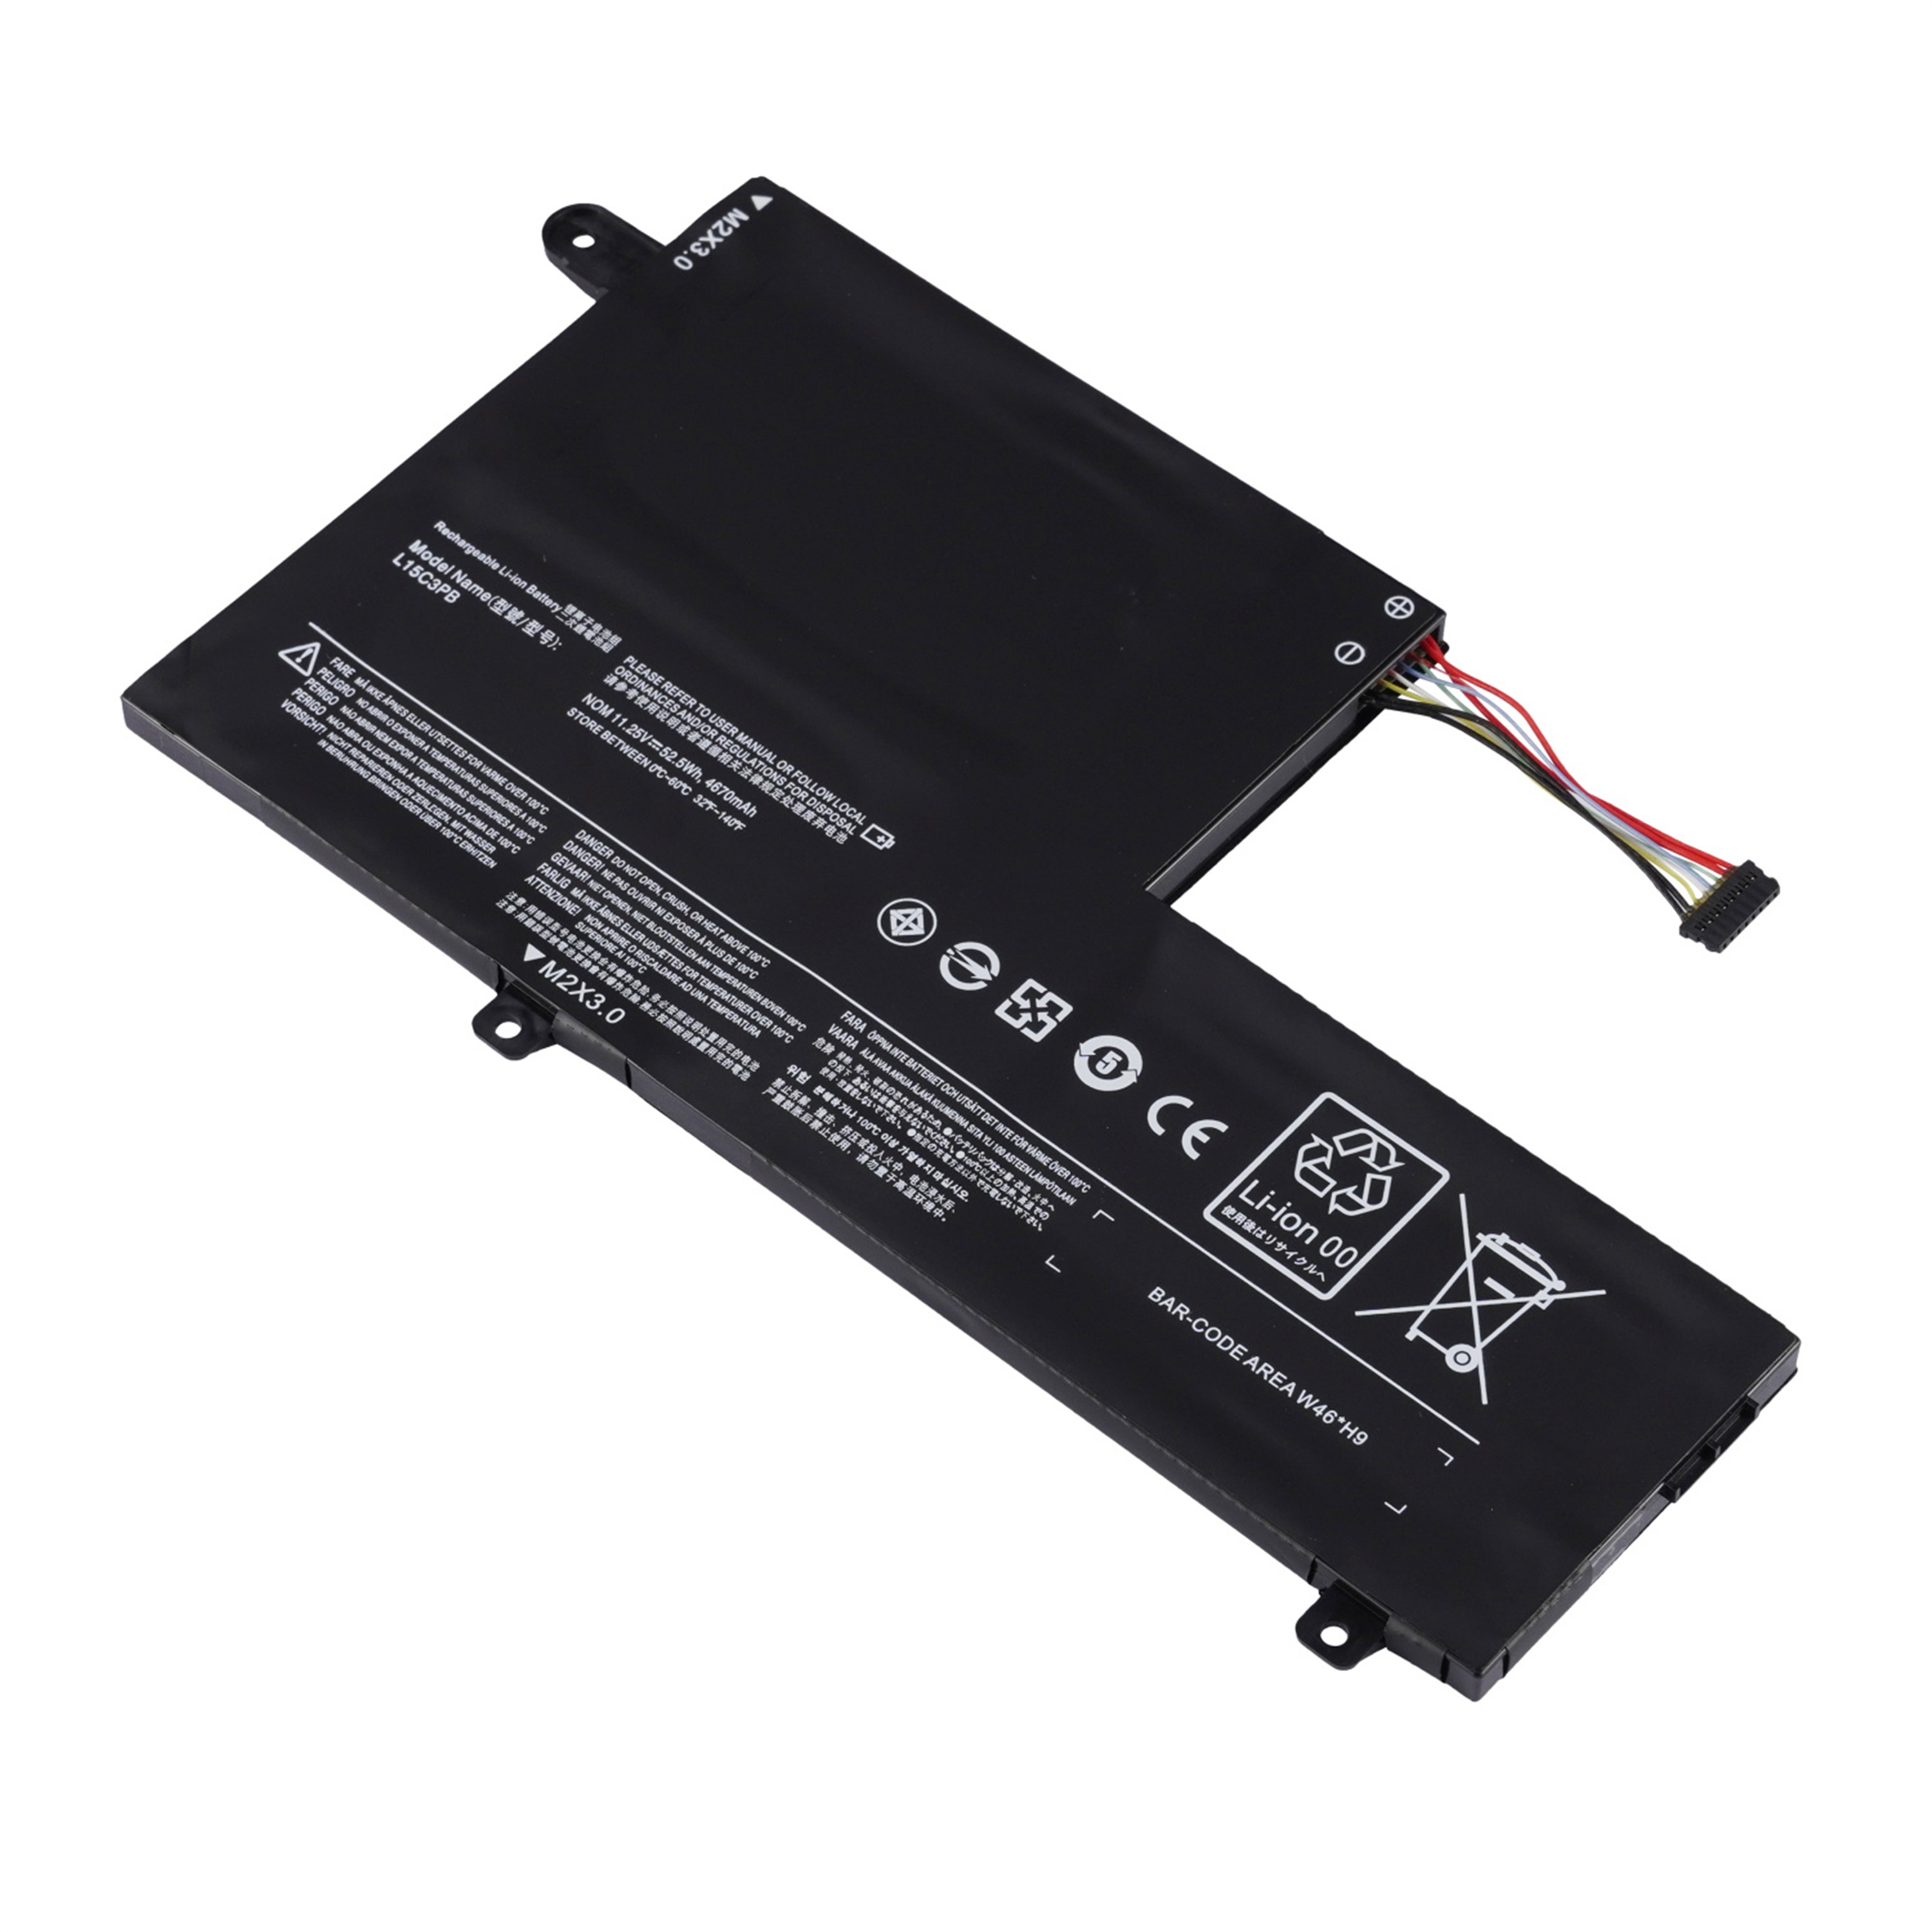 L15C3PB1 rechargeable lithium ion Notebook battery Laptop battery For with Lenovo FLEX3 FLEX4-1580 320S-15AST 320S-15IKB 11.25V 52.5WH 4670MAH